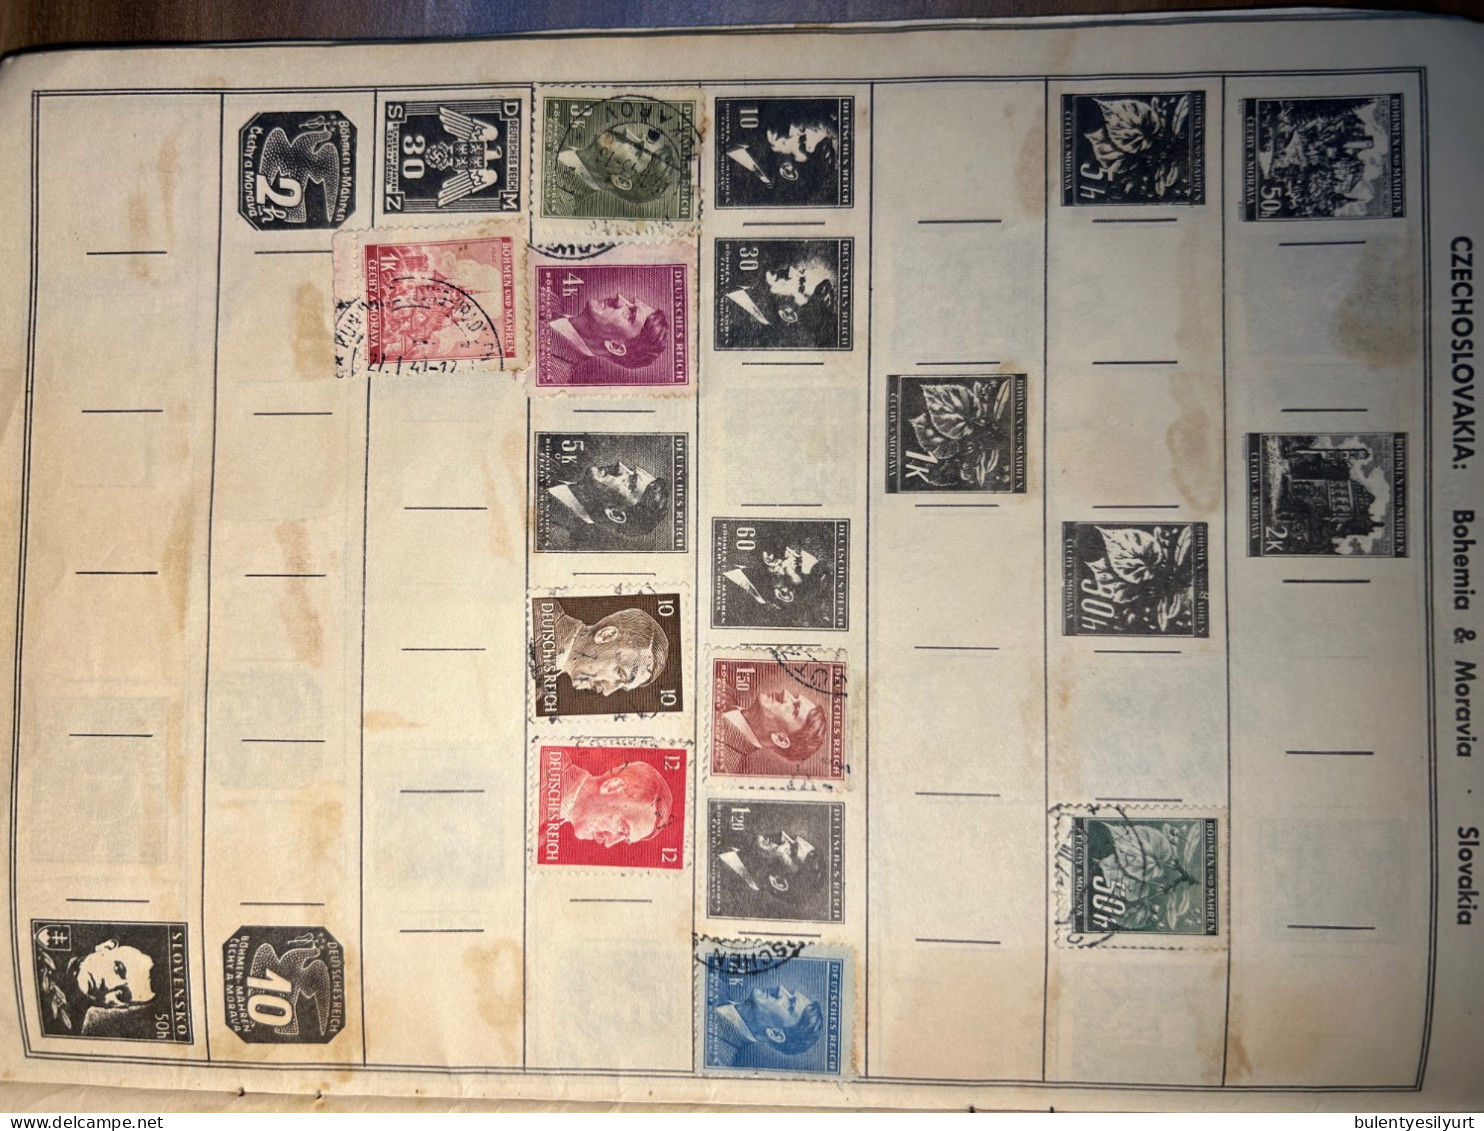 Special and Unique stamps from all countries from the late 1800s and 1900s